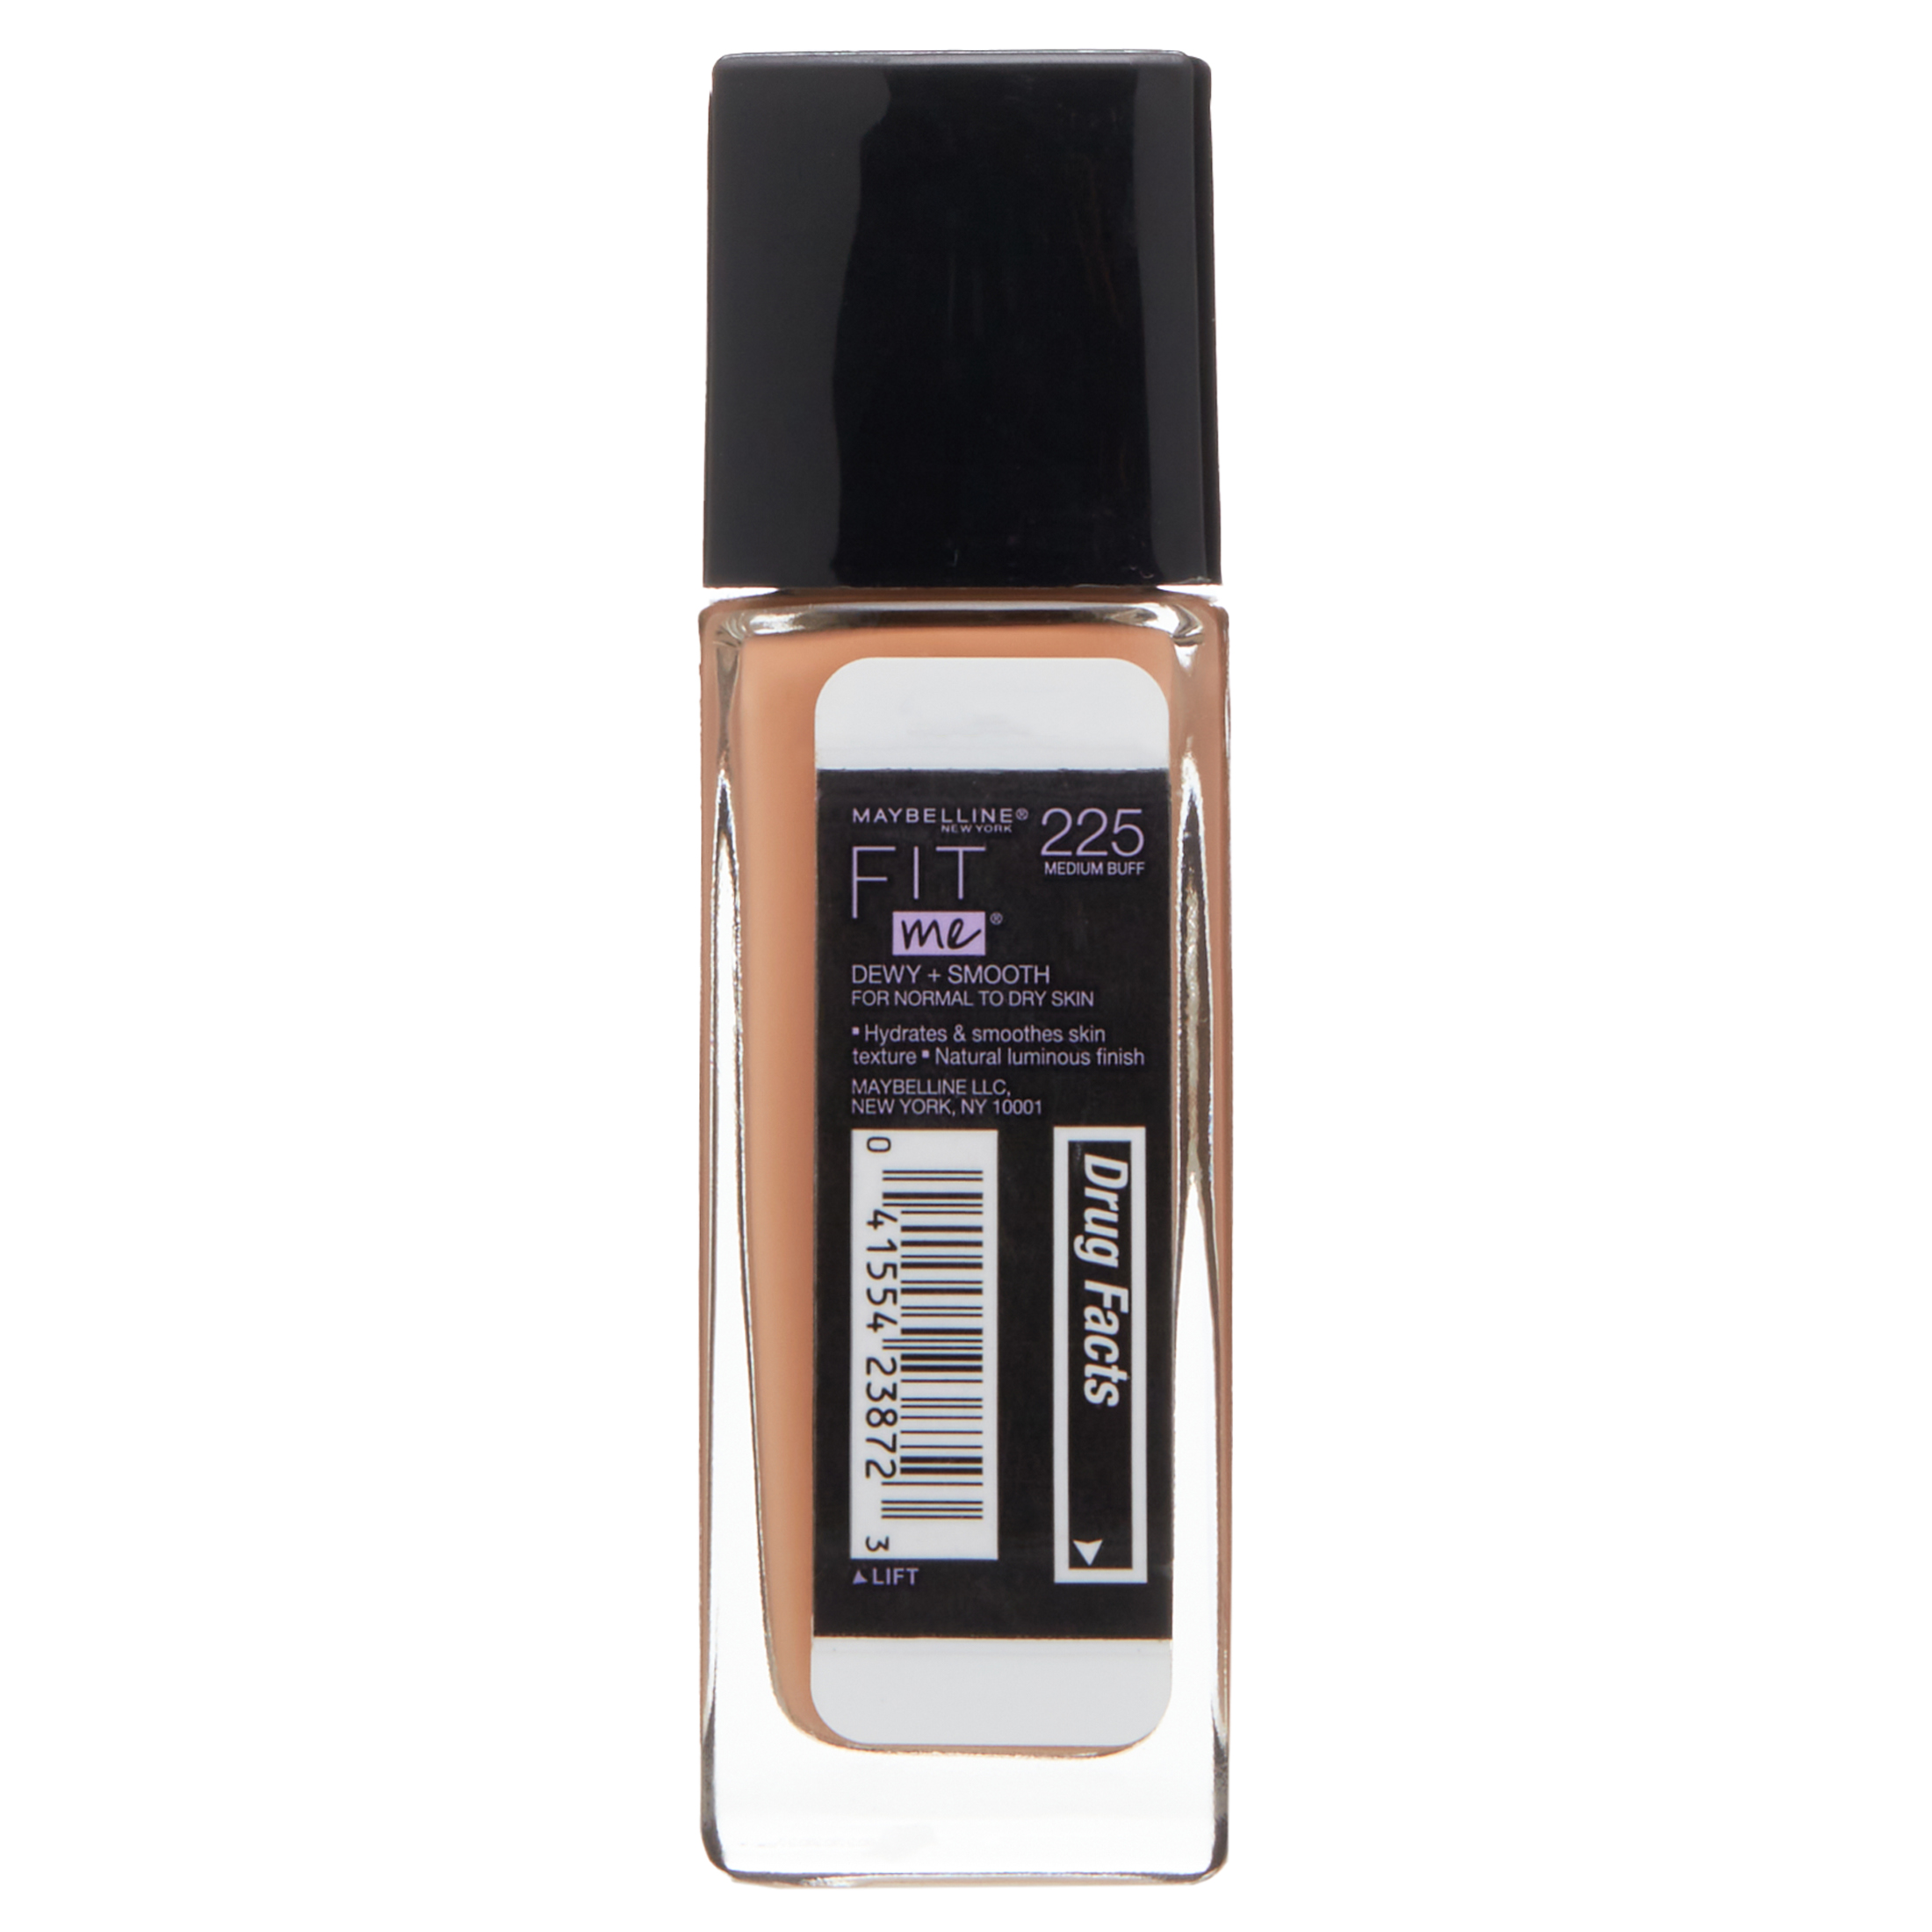 Maybelline Fit Me Dewy And Smooth Liquid Foundation Spf 18 225 Medium